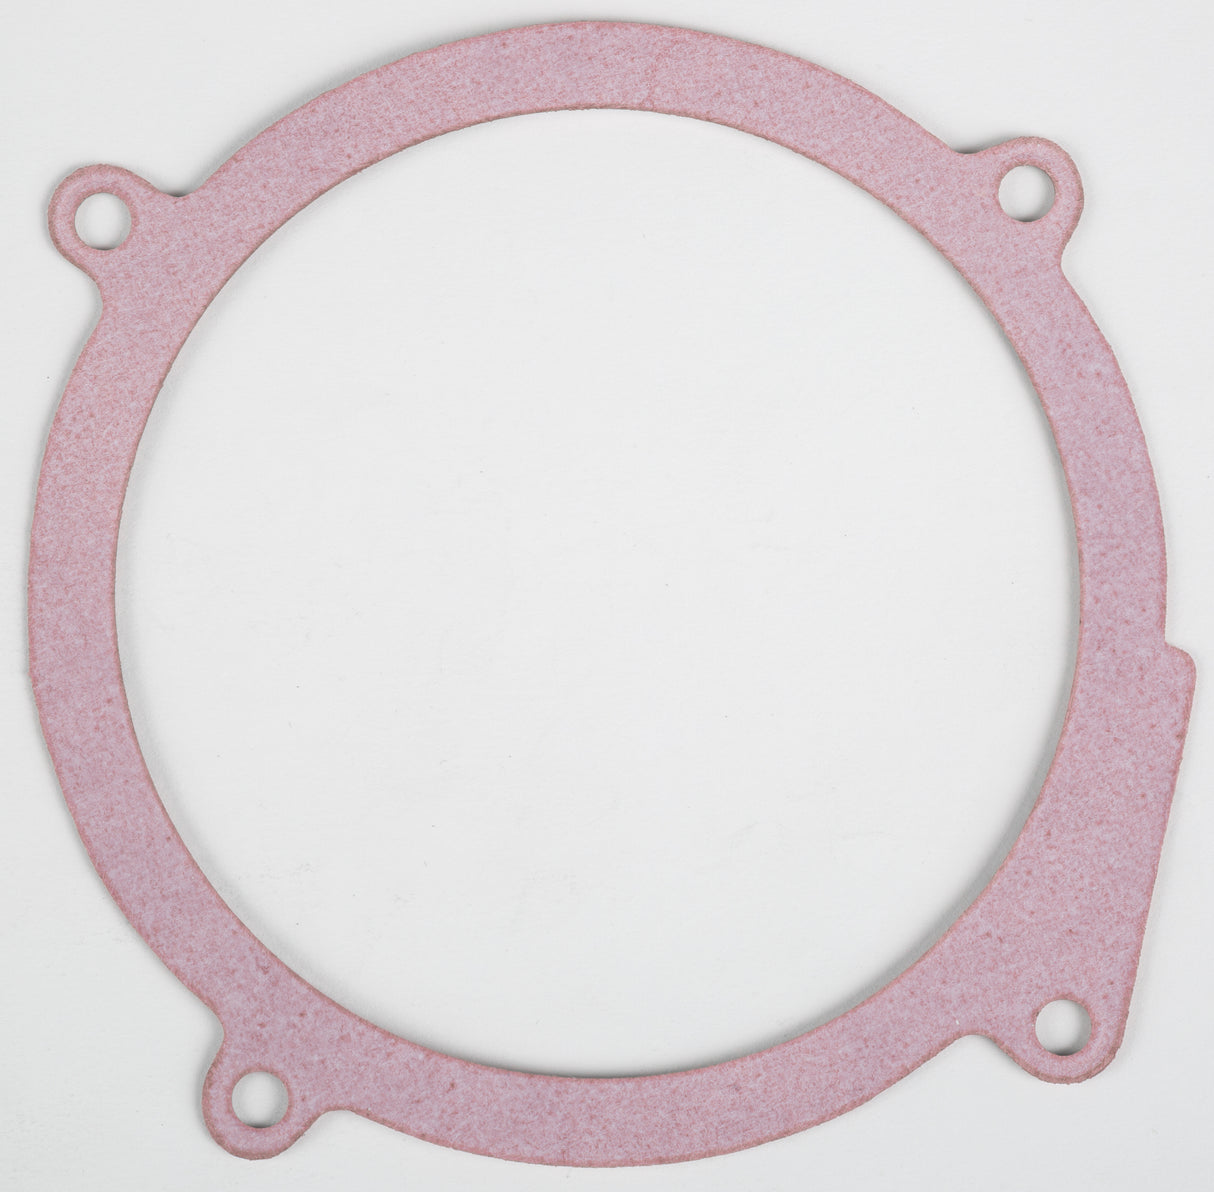 SCG-02 Motorcycle Ignition Cover Gasket